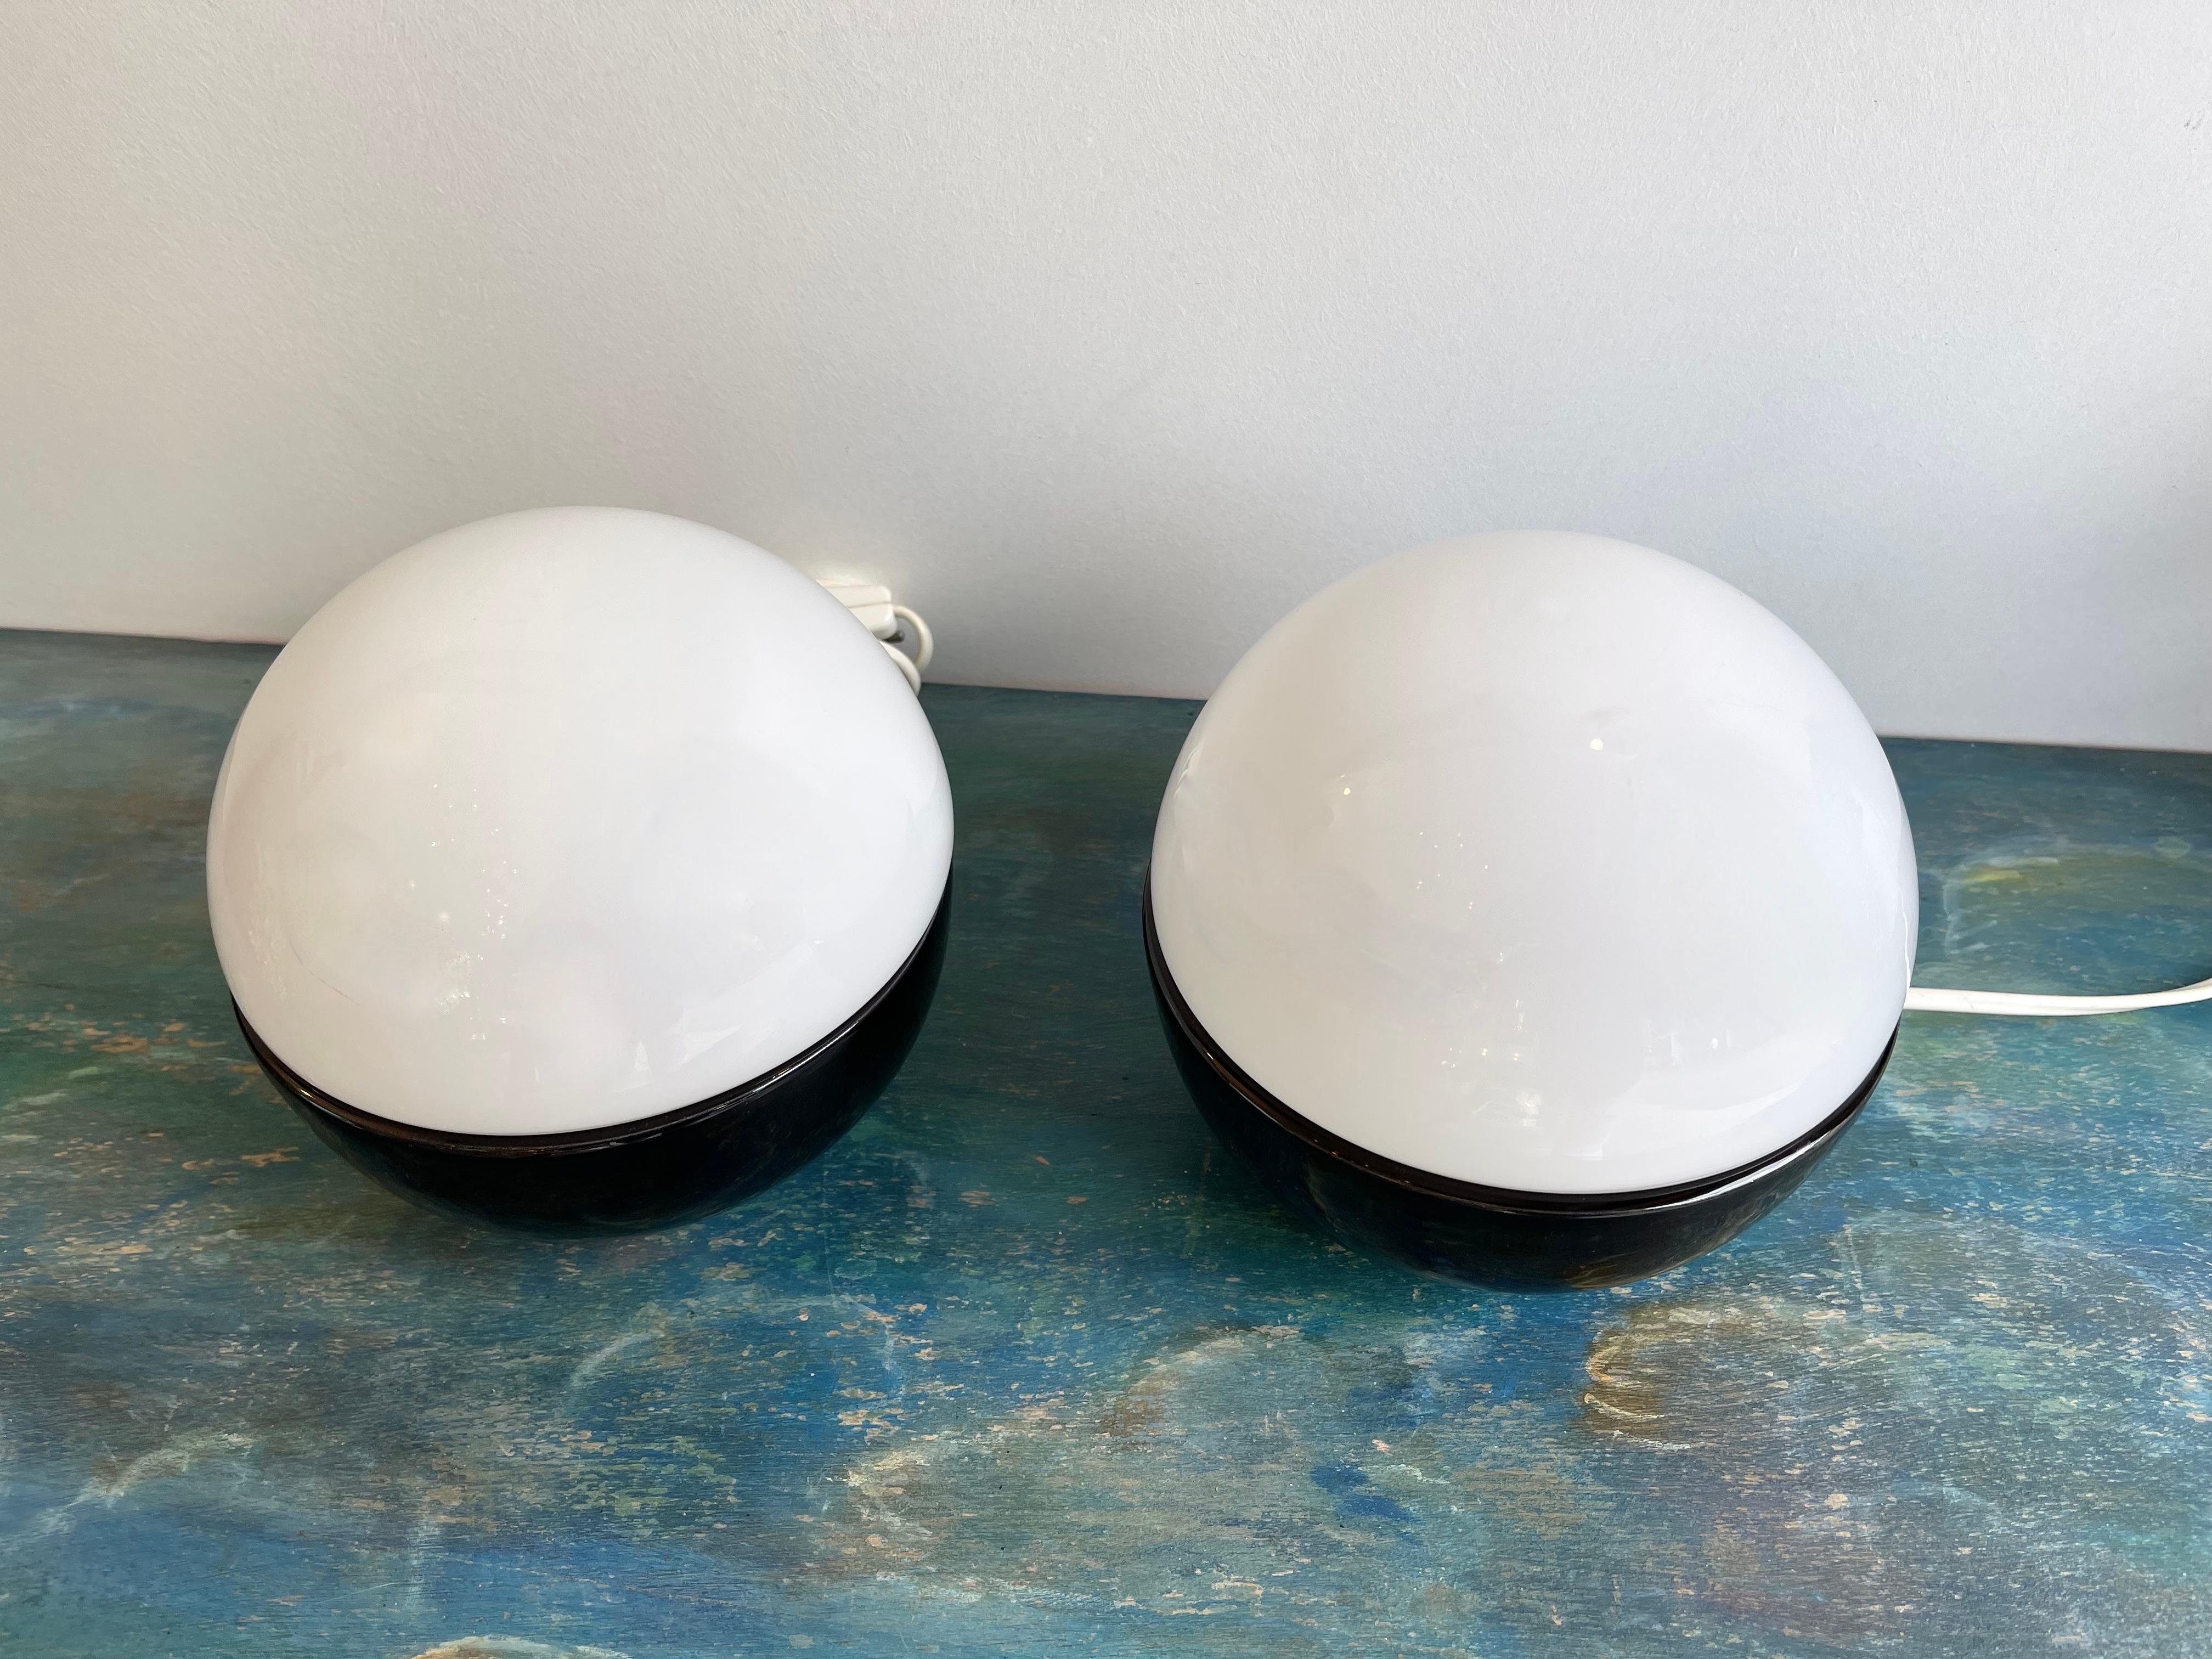 Italian Pair of Ceramic and Opaline Glass Ball Lamps by Alvino Bagni. Italy, 1970s